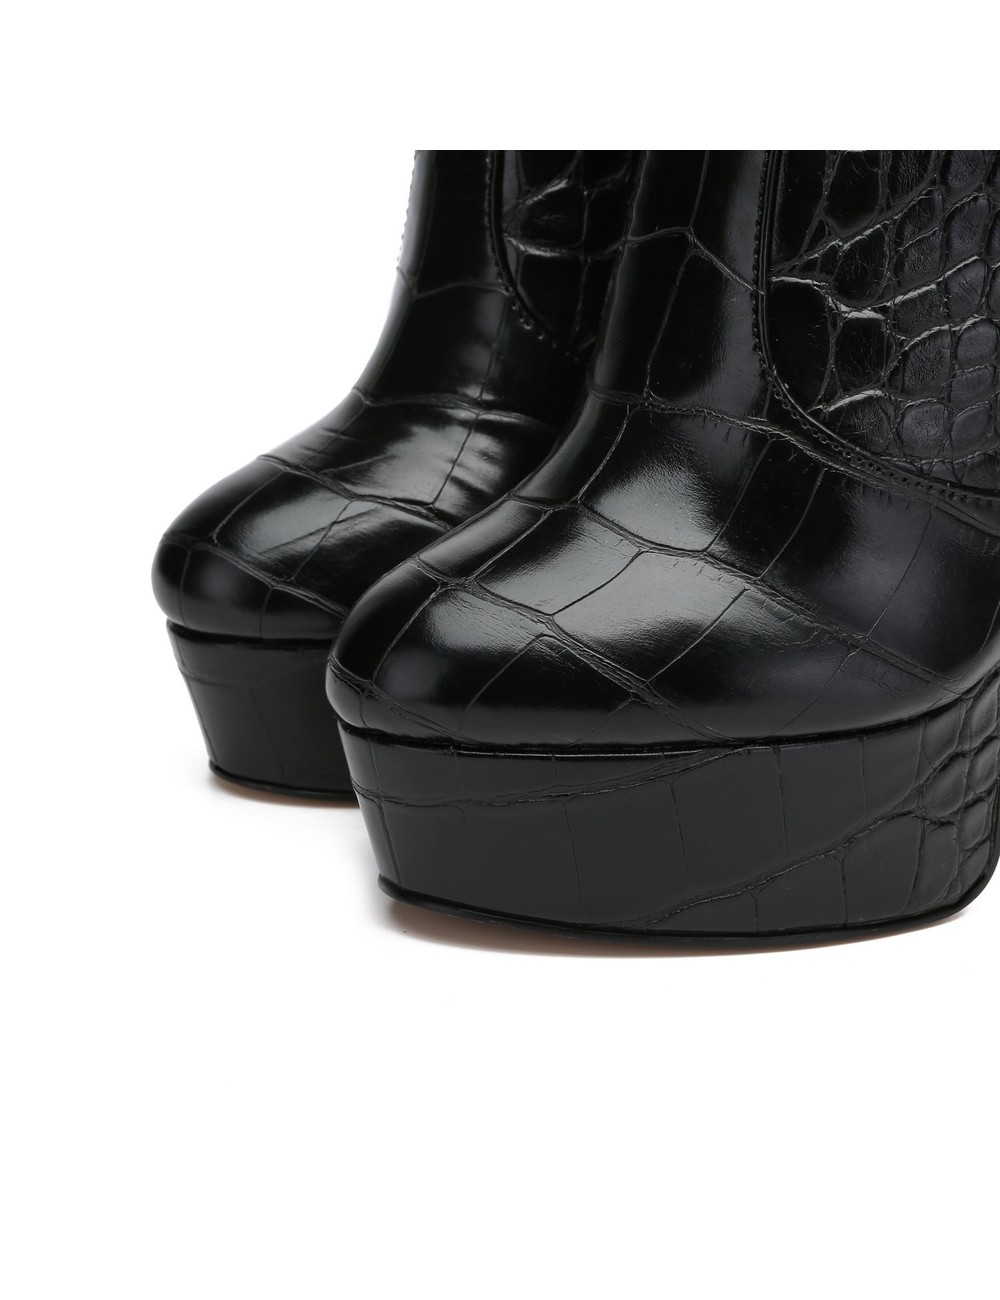 Giaro Giaro Platform ankle boots STACK in black with 14cm heels